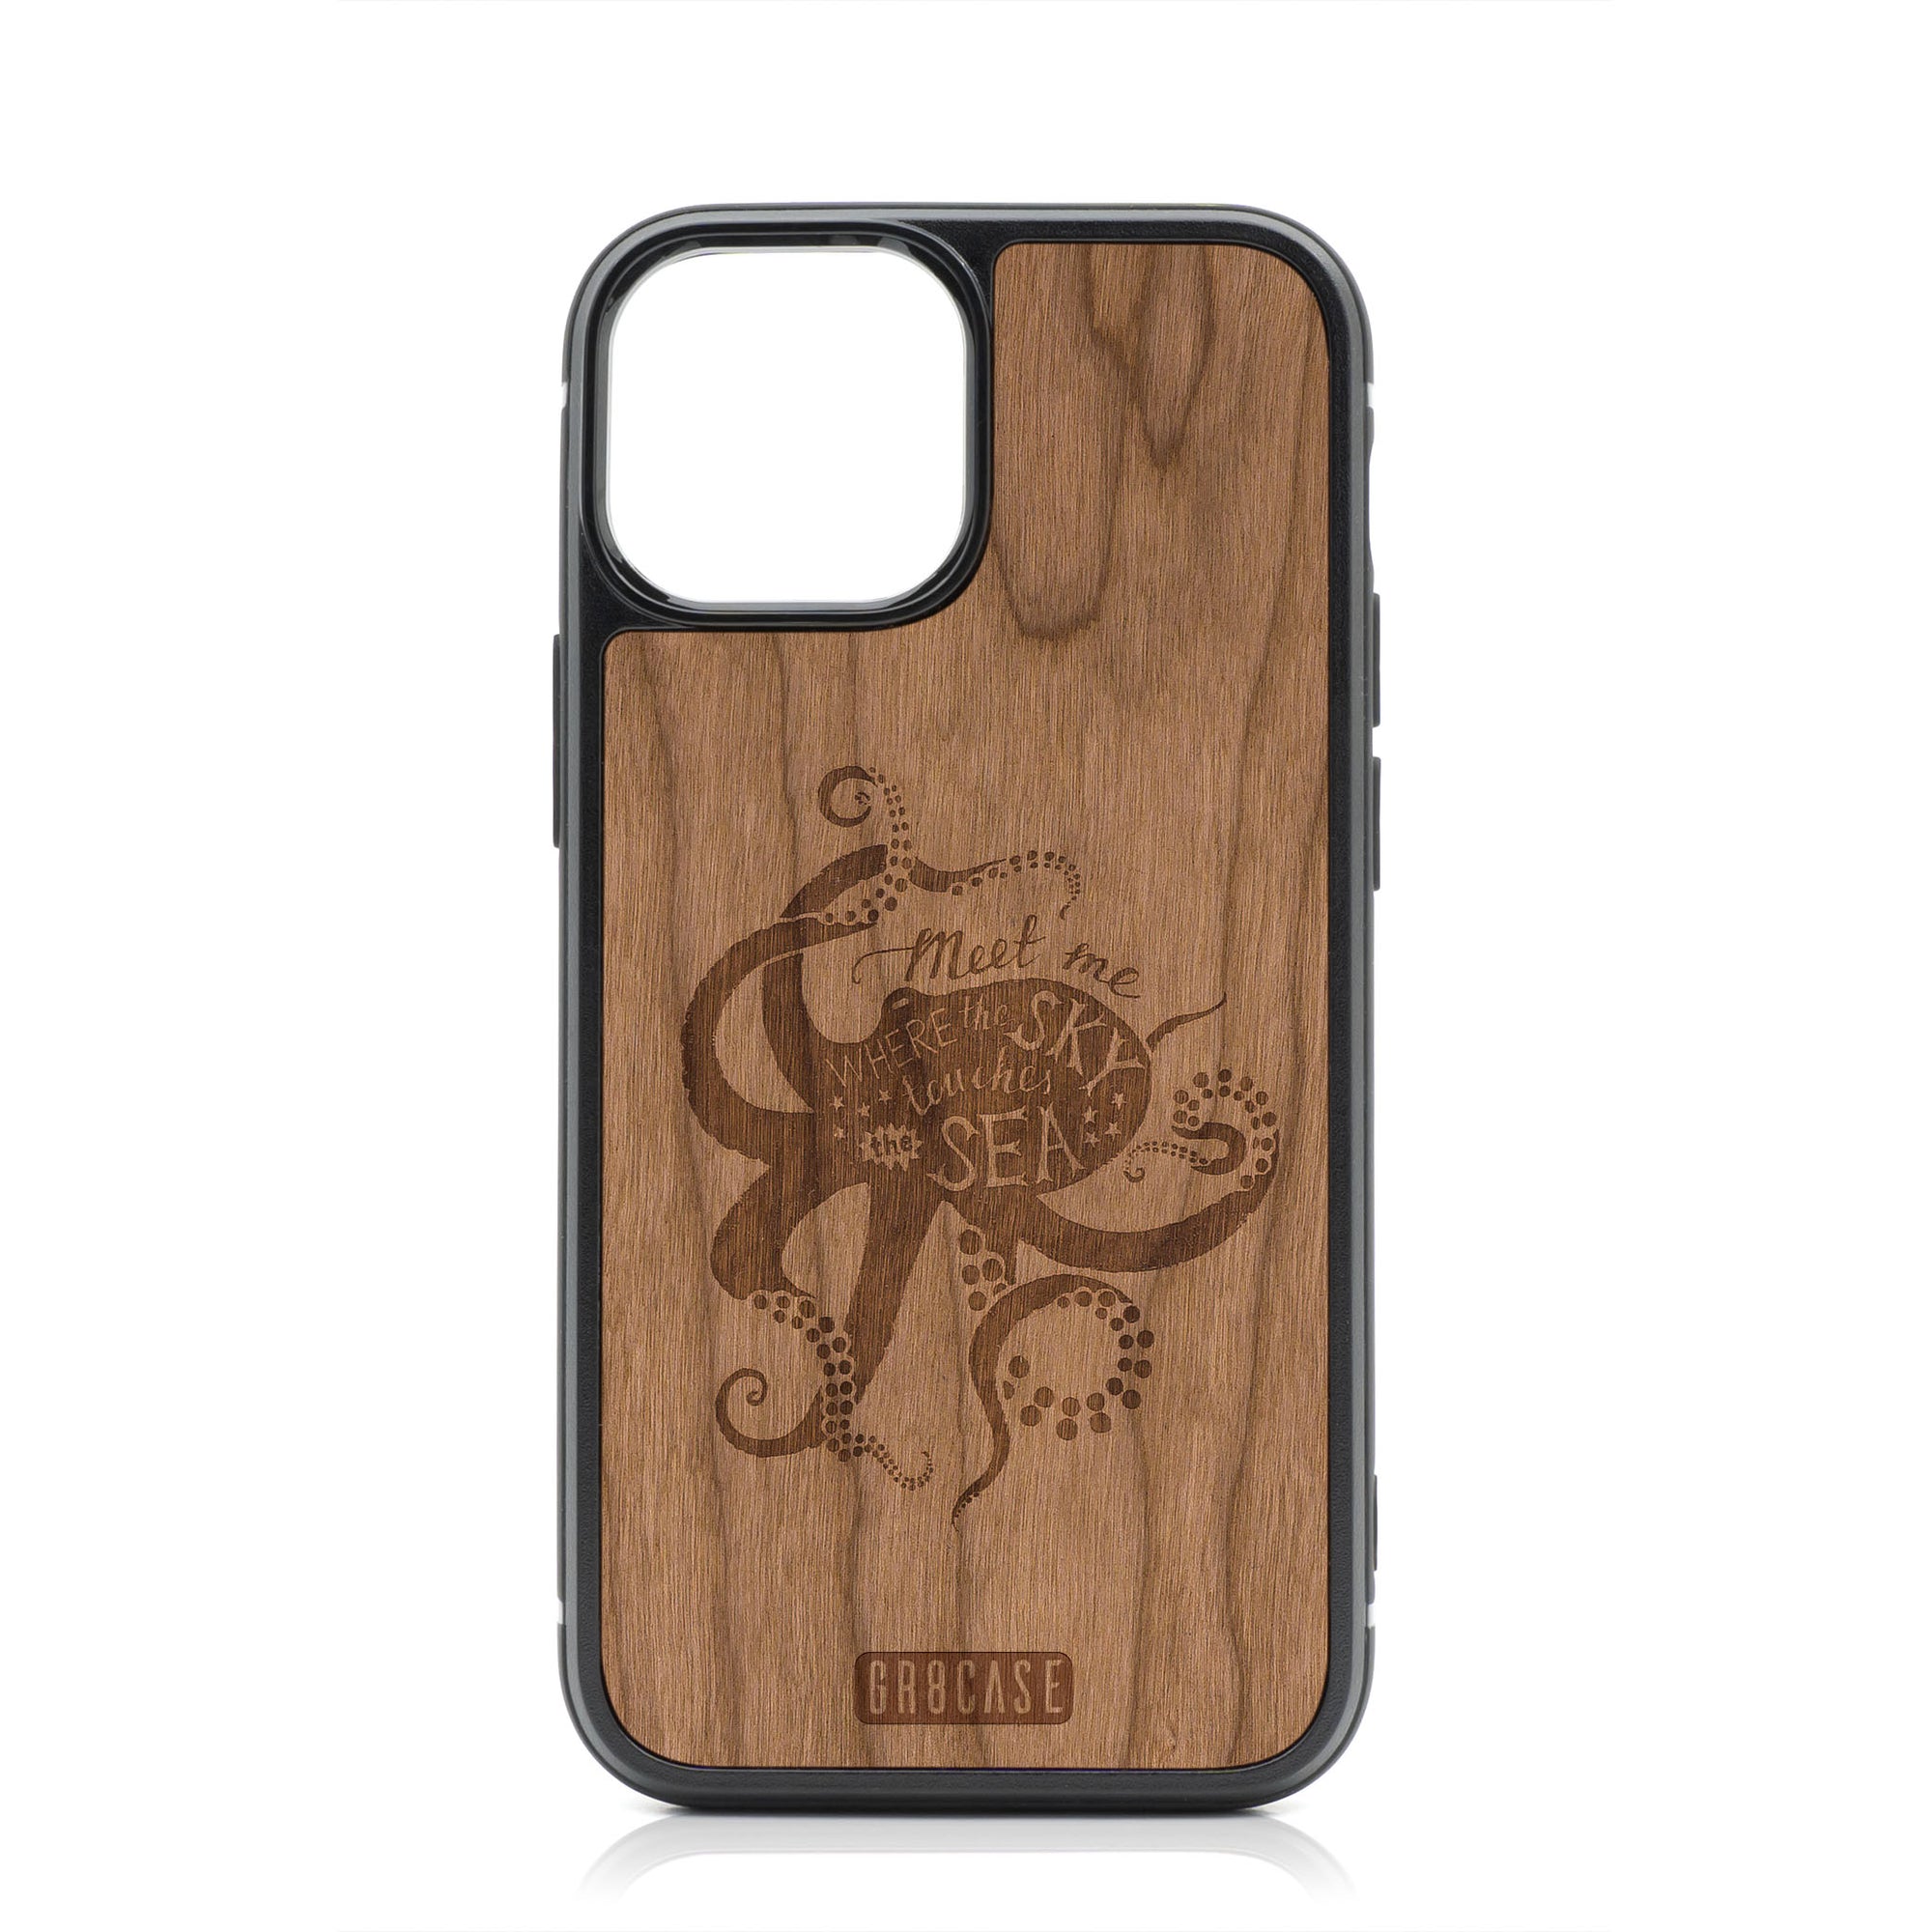 Meet Me Where The Sky Touches The Sea (Octopus) Design Wood Case For iPhone 13 Mini